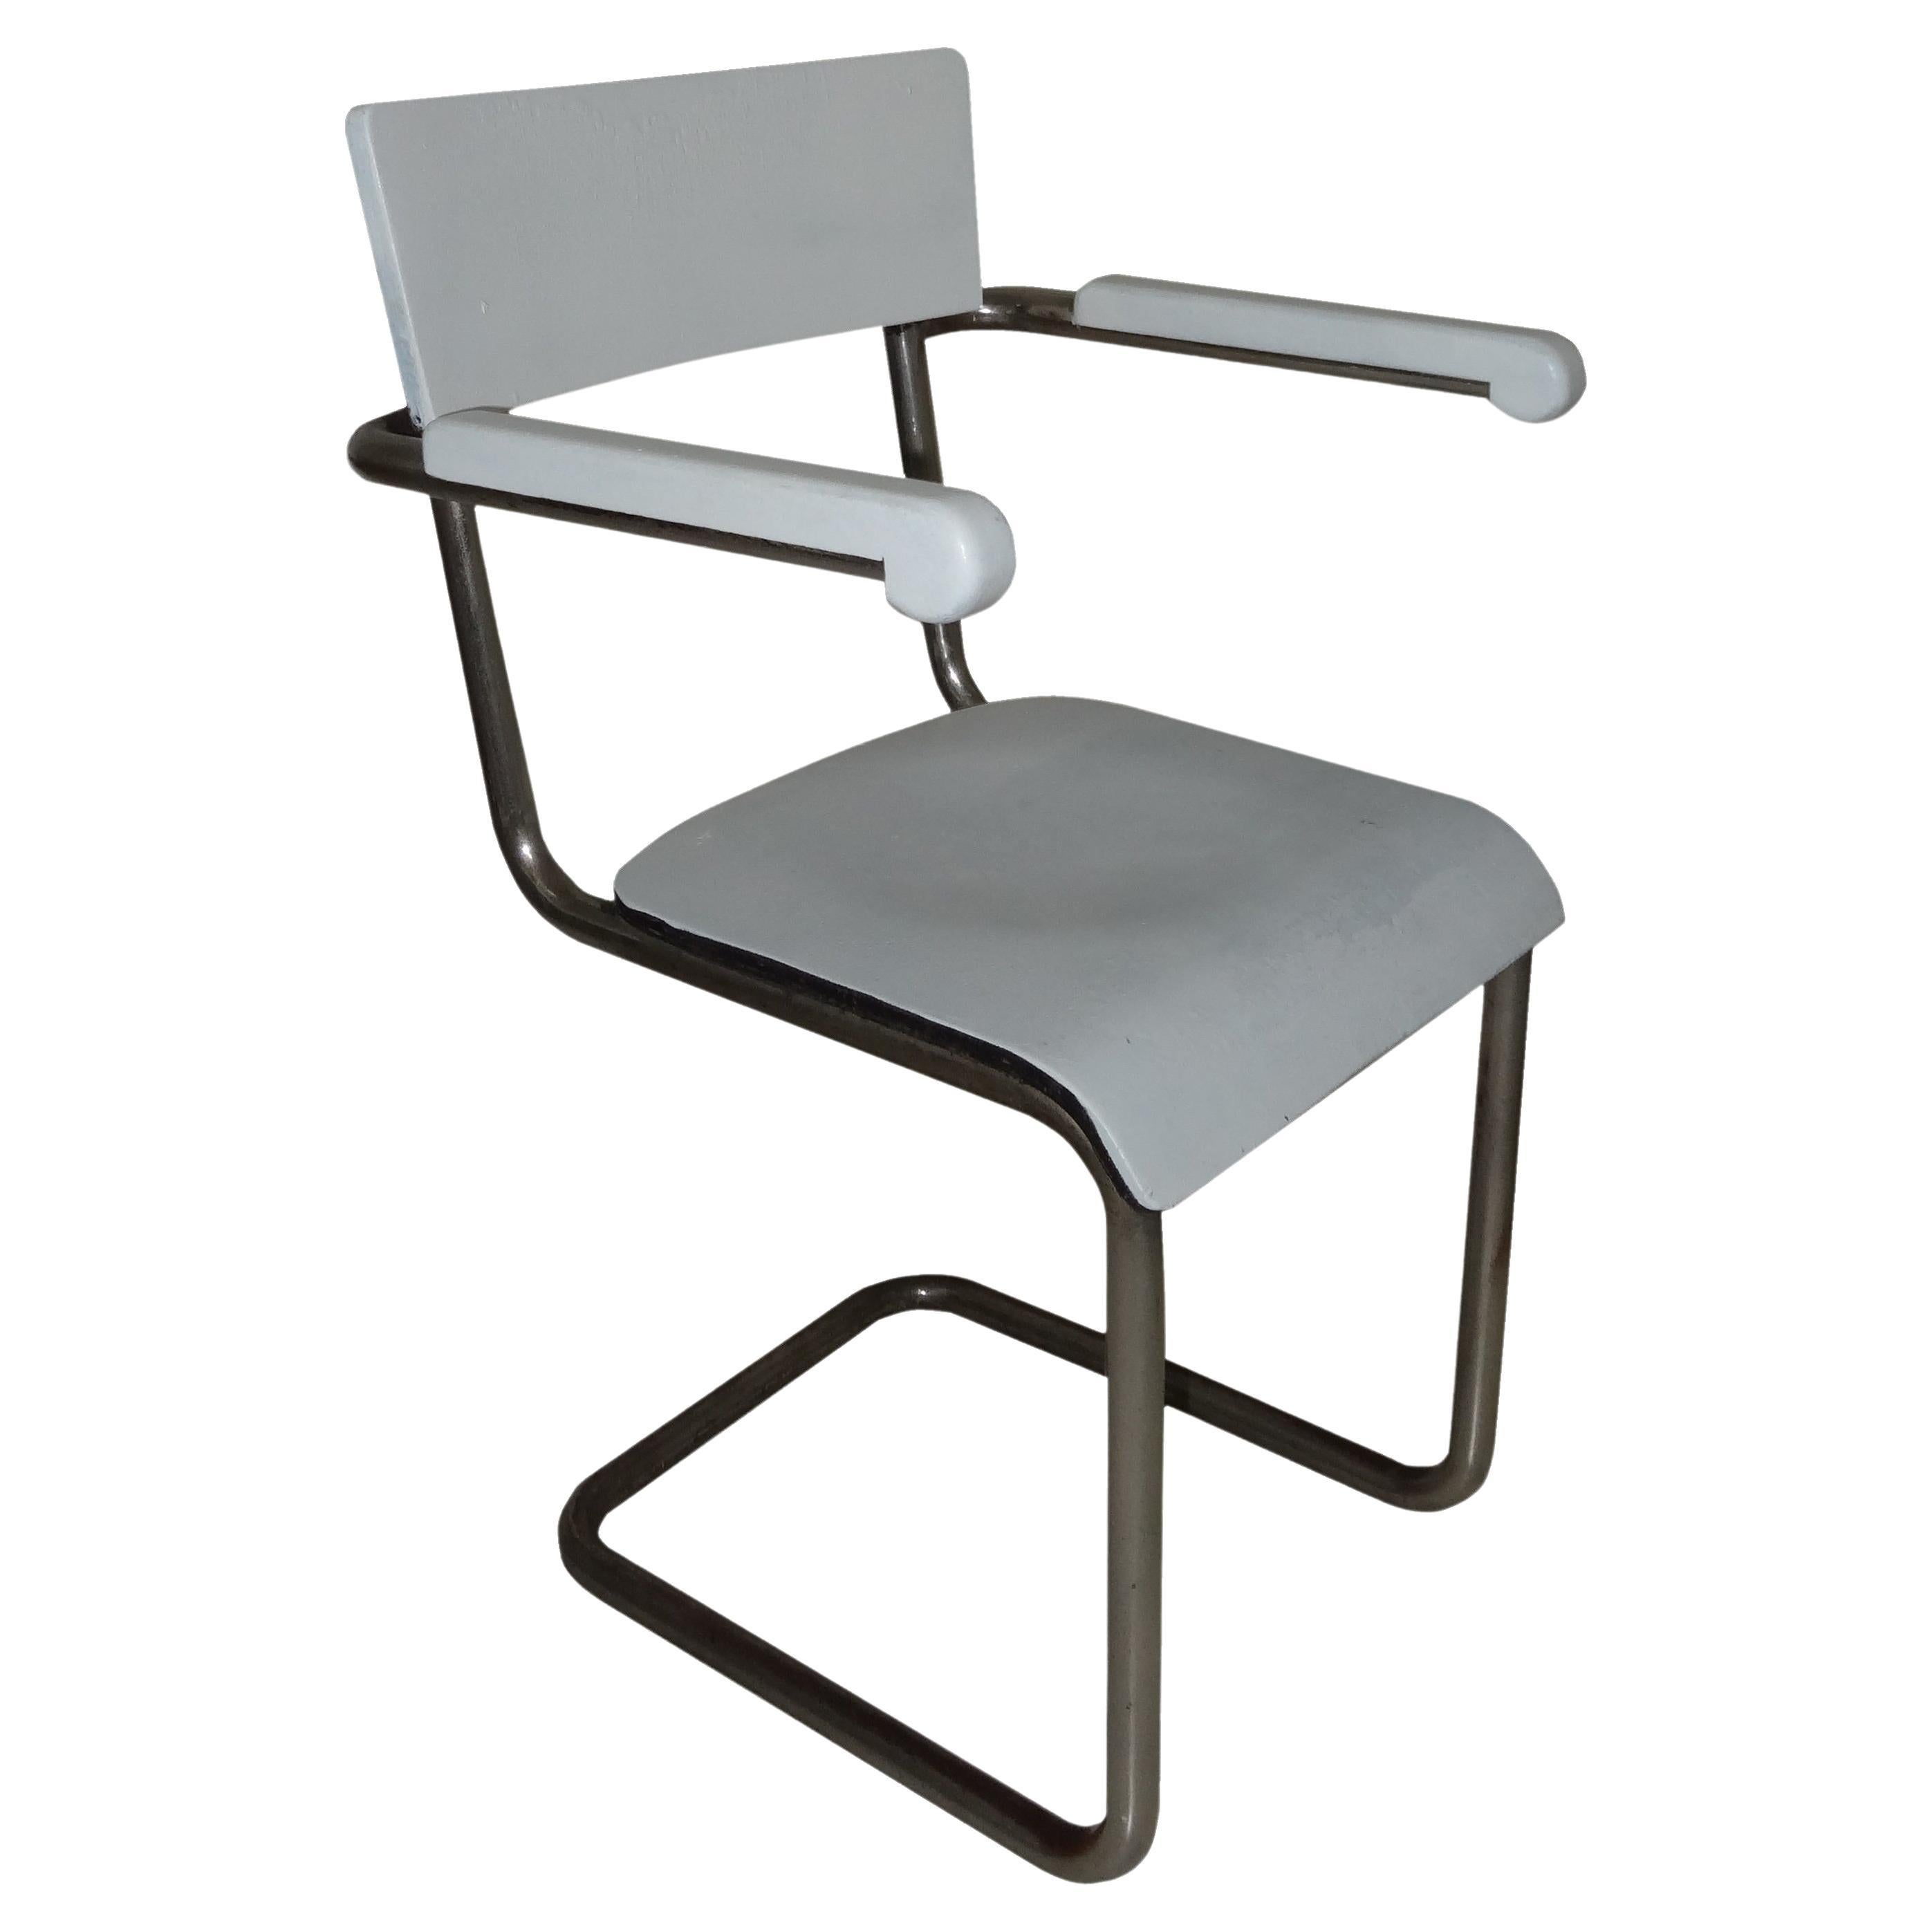 Armchair in Wood and Chrome, Style: Bauhaus, German, 1940 For Sale